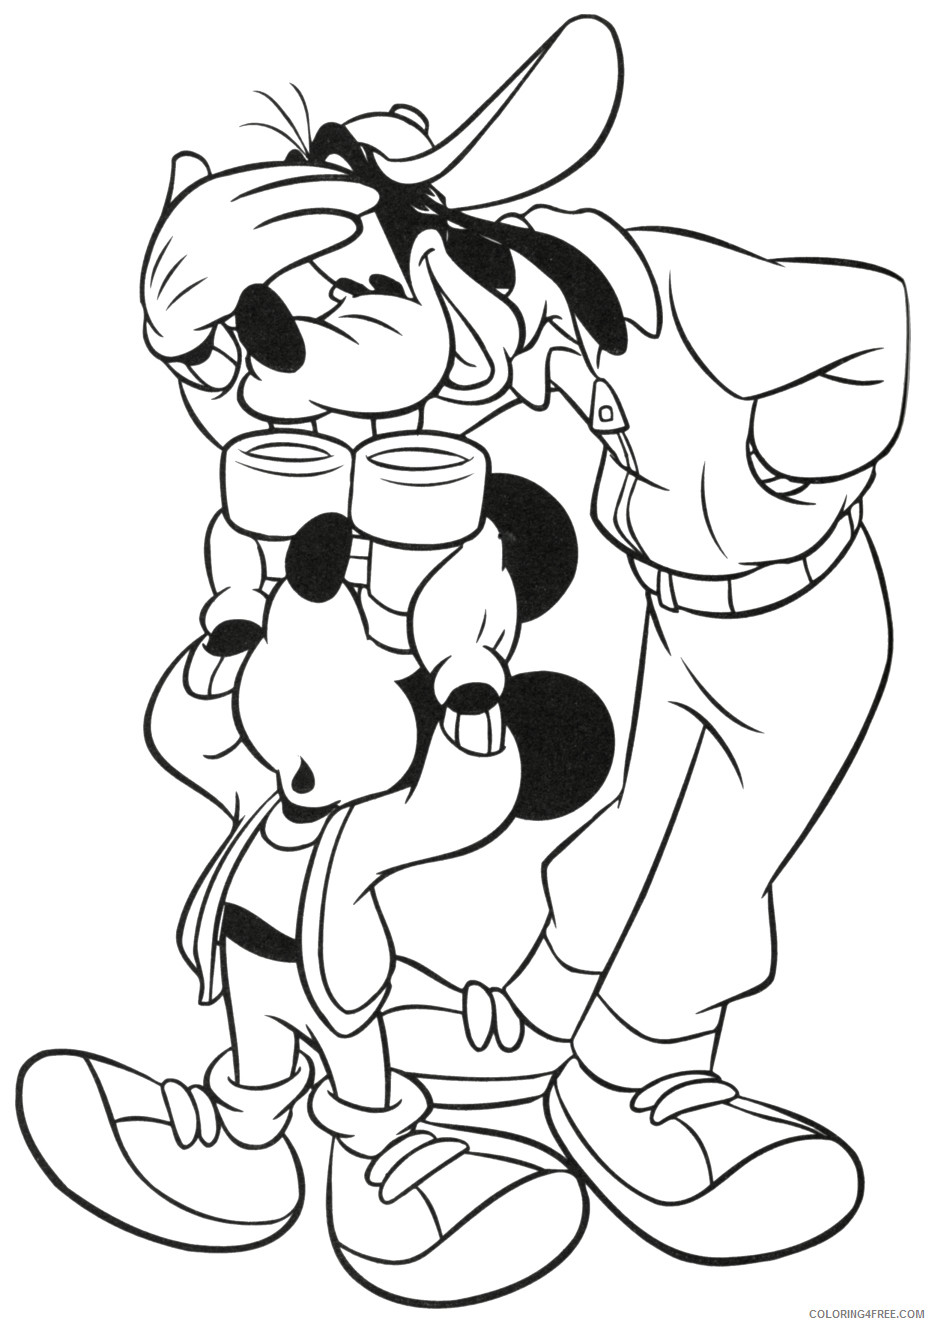 Goofy Coloring Pages Cartoons Goofy and Micky Mouse Printable 2020 2985 Coloring4free